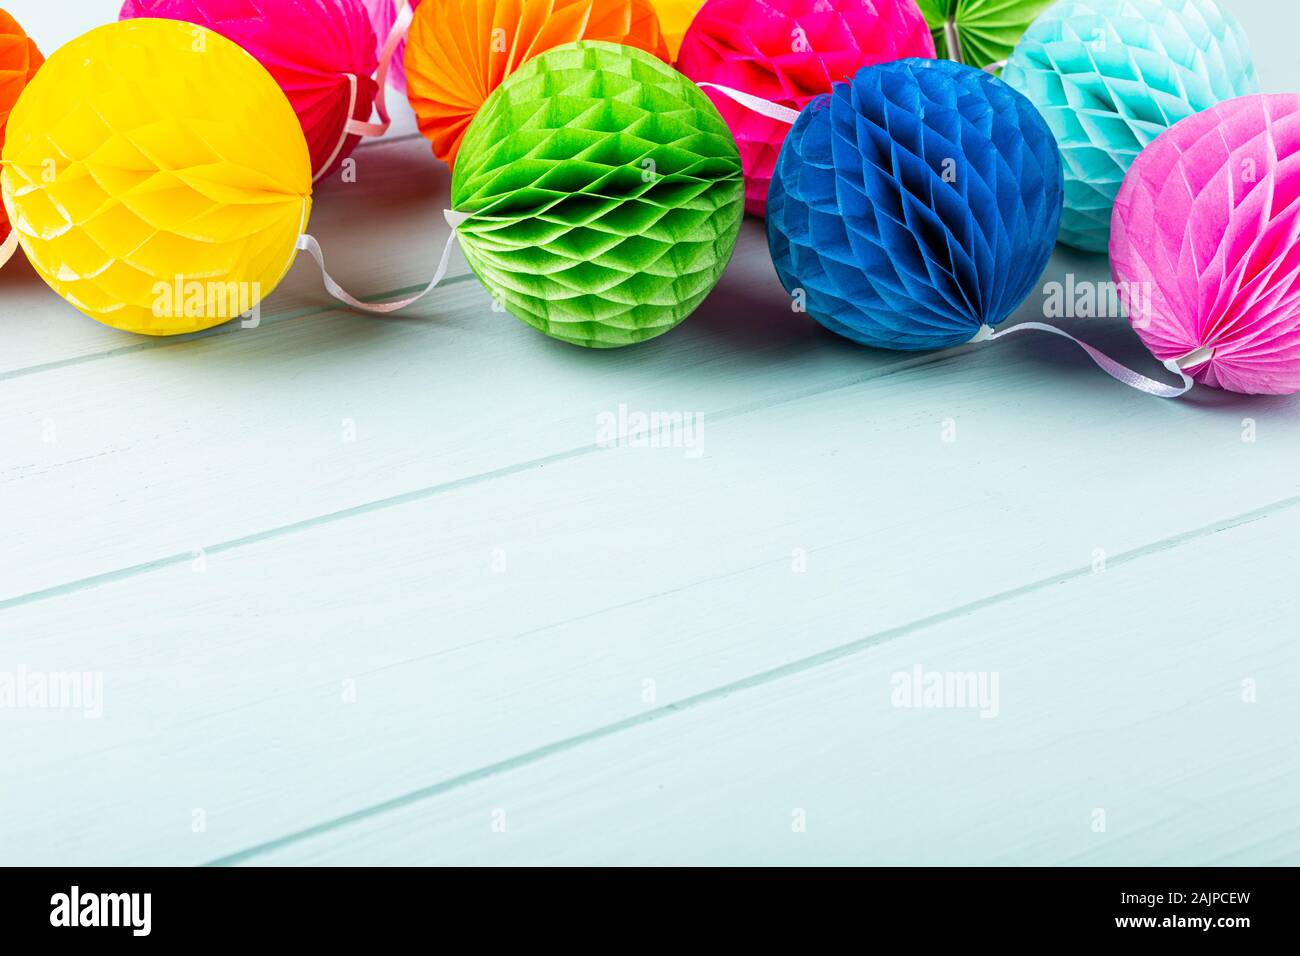 Festive background with colorful paper balls. Stock Photo